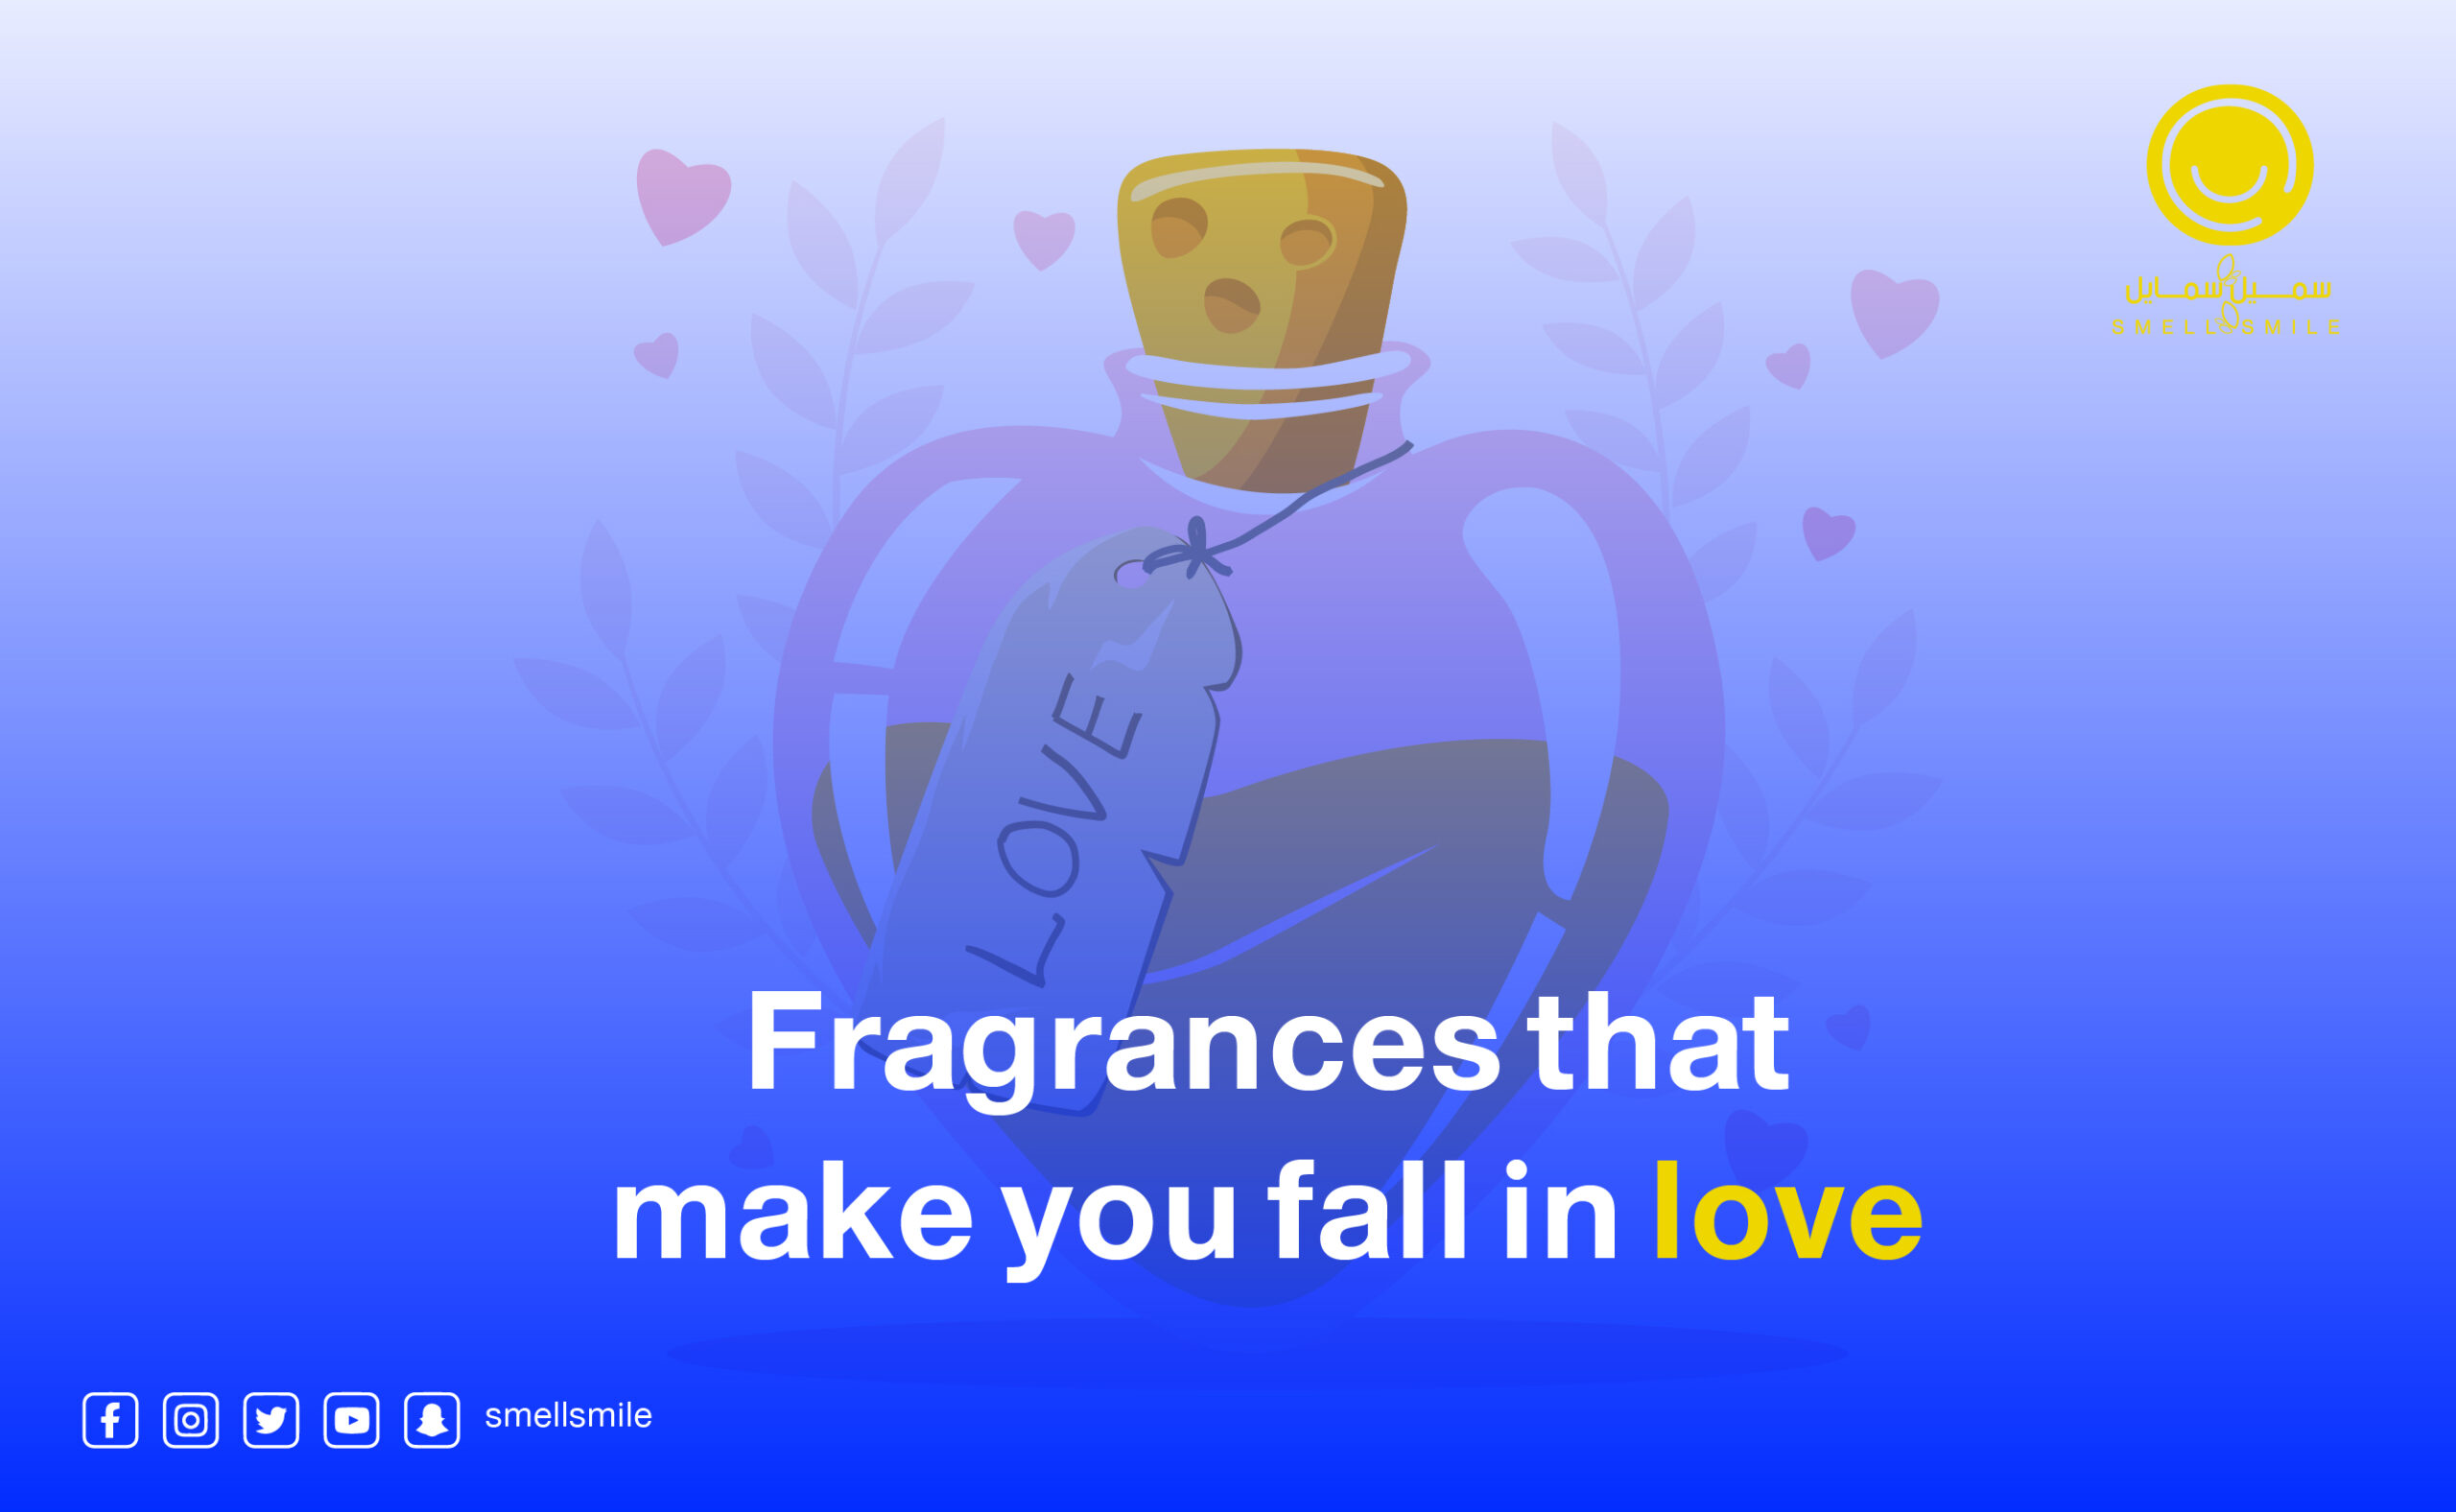 Fragrances that make you fall in love